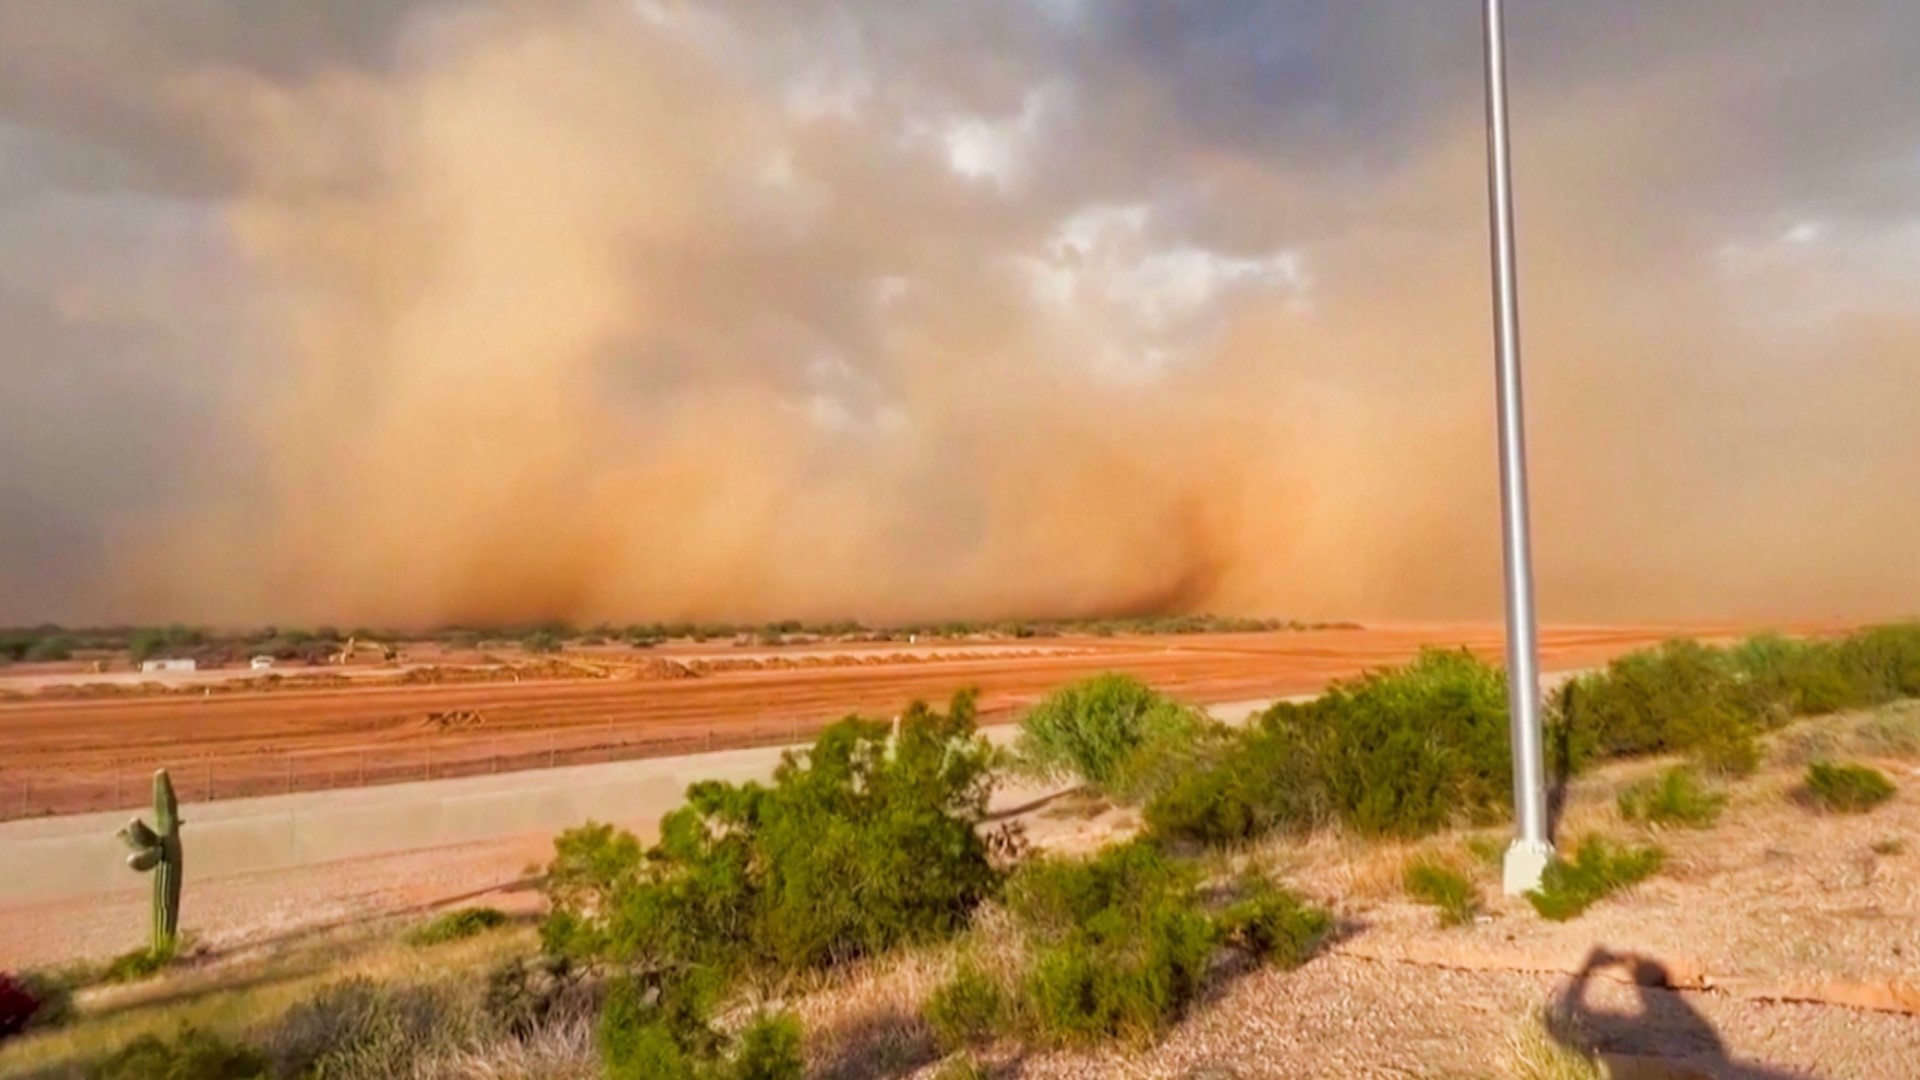 The dust storm caused power to be lost by thousands around the state. Veuer's Tony Spitz has the details.